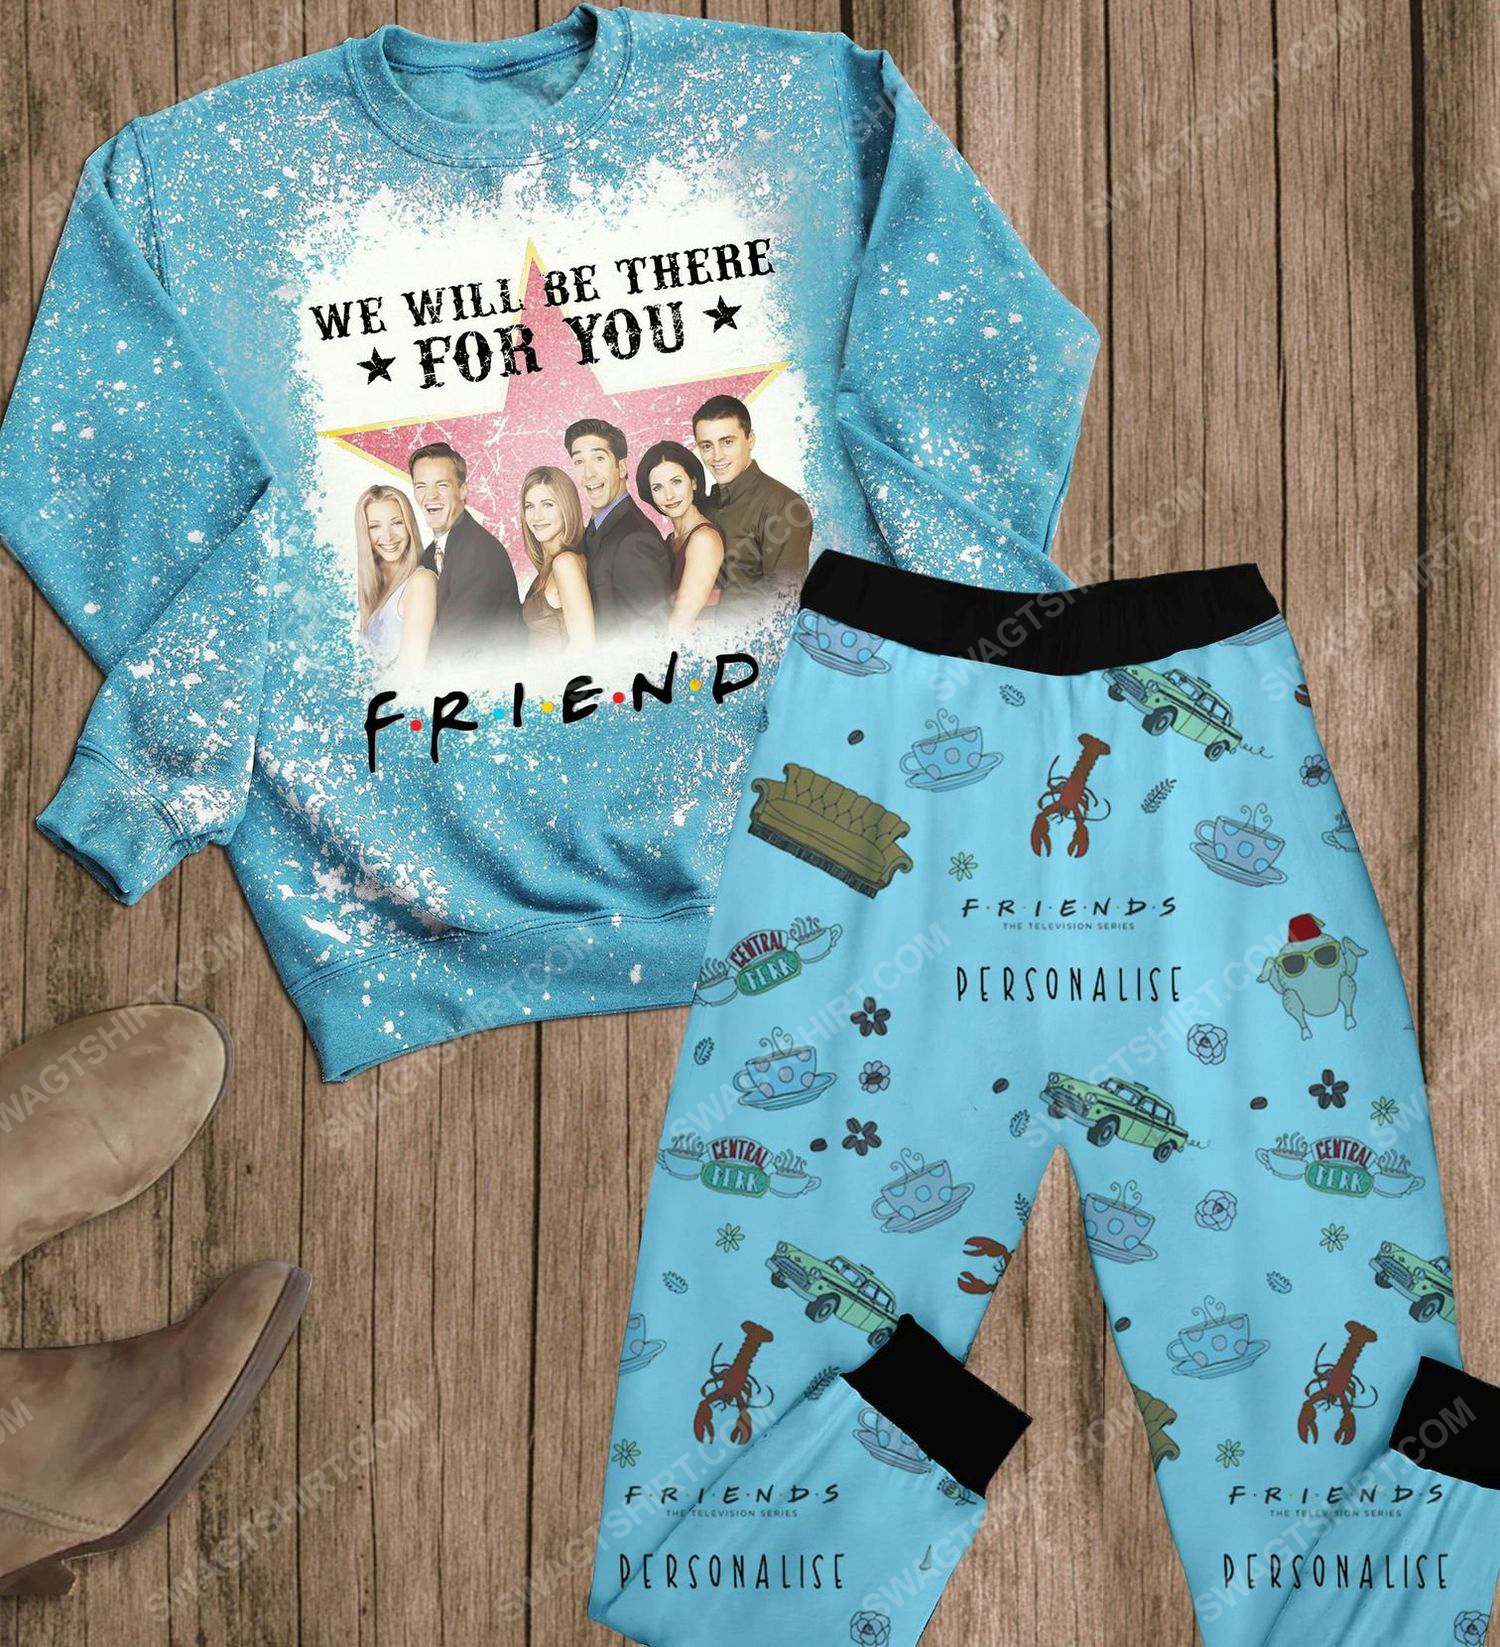 Friends we will be there for you full print pajamas set 1 - Copy